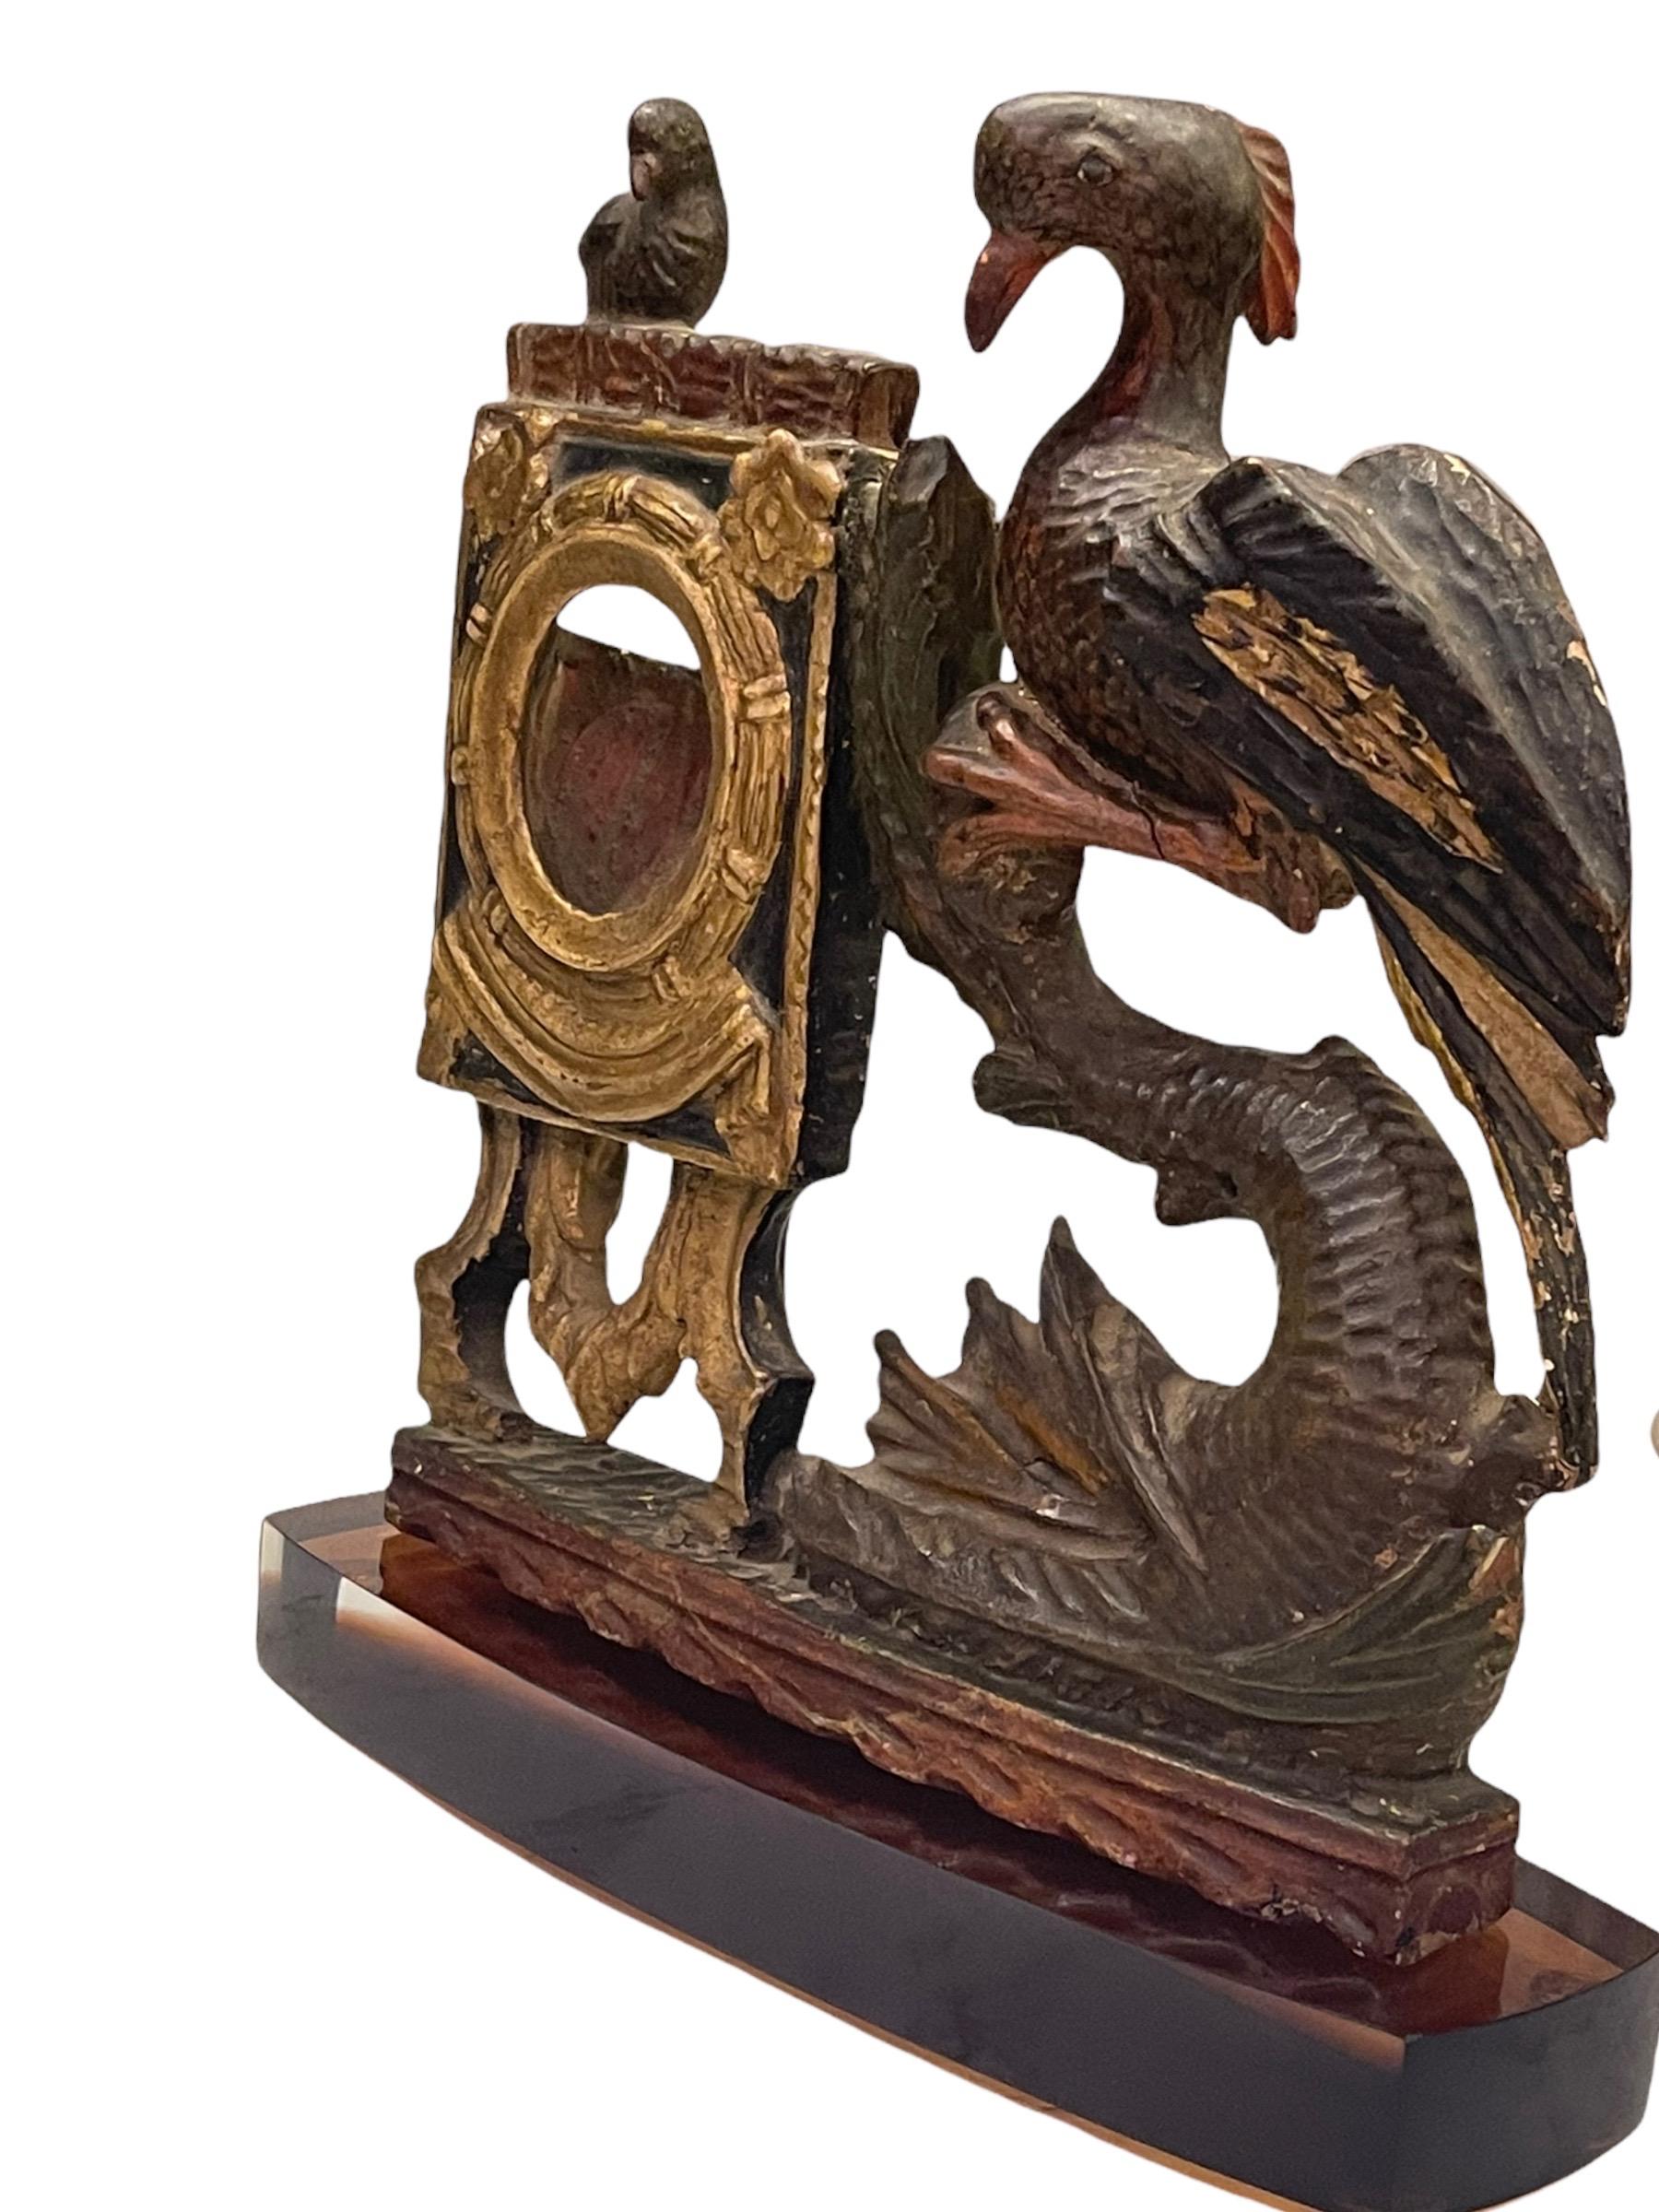 Late 17th century French extremely fine carved wood polychromed and gold gilded pocket watch holder. It has a carved cup behind the front opening to hold the pocket watch. These became a very decorative ornament for the mantlepieces for aristocrats